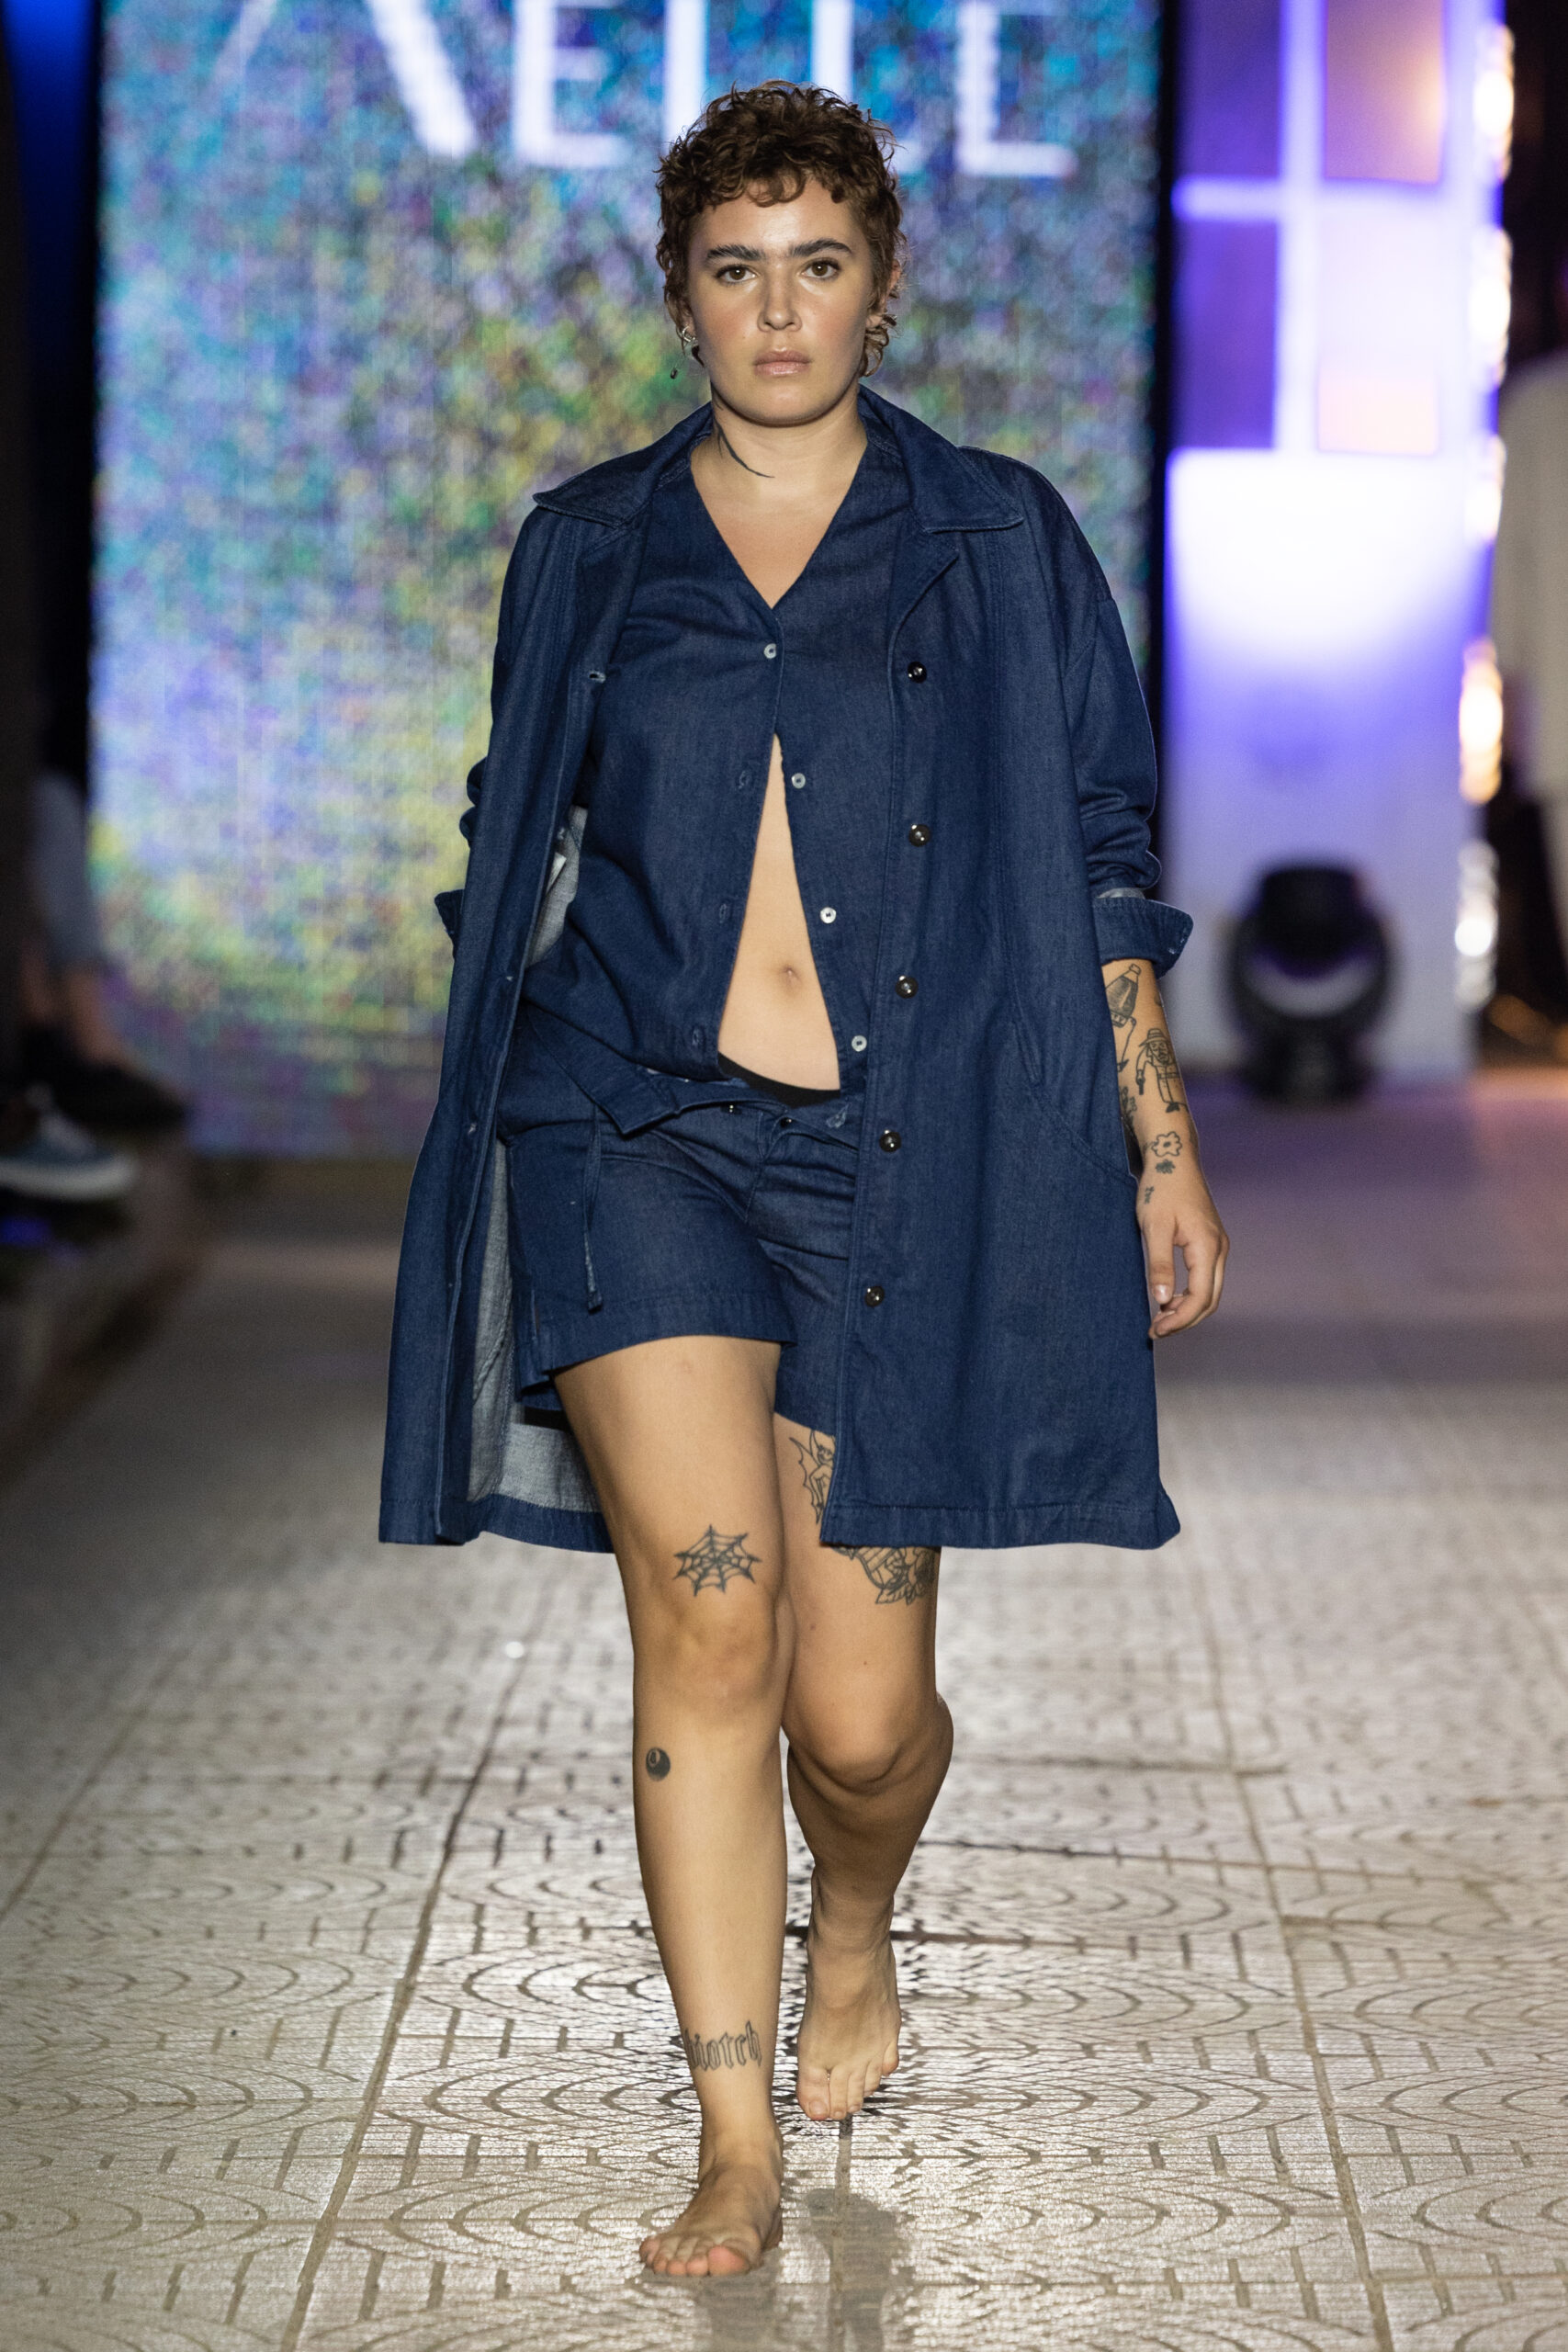 the fashion propellant - Altaroma - Rome is my runway 3 - Aelle 4